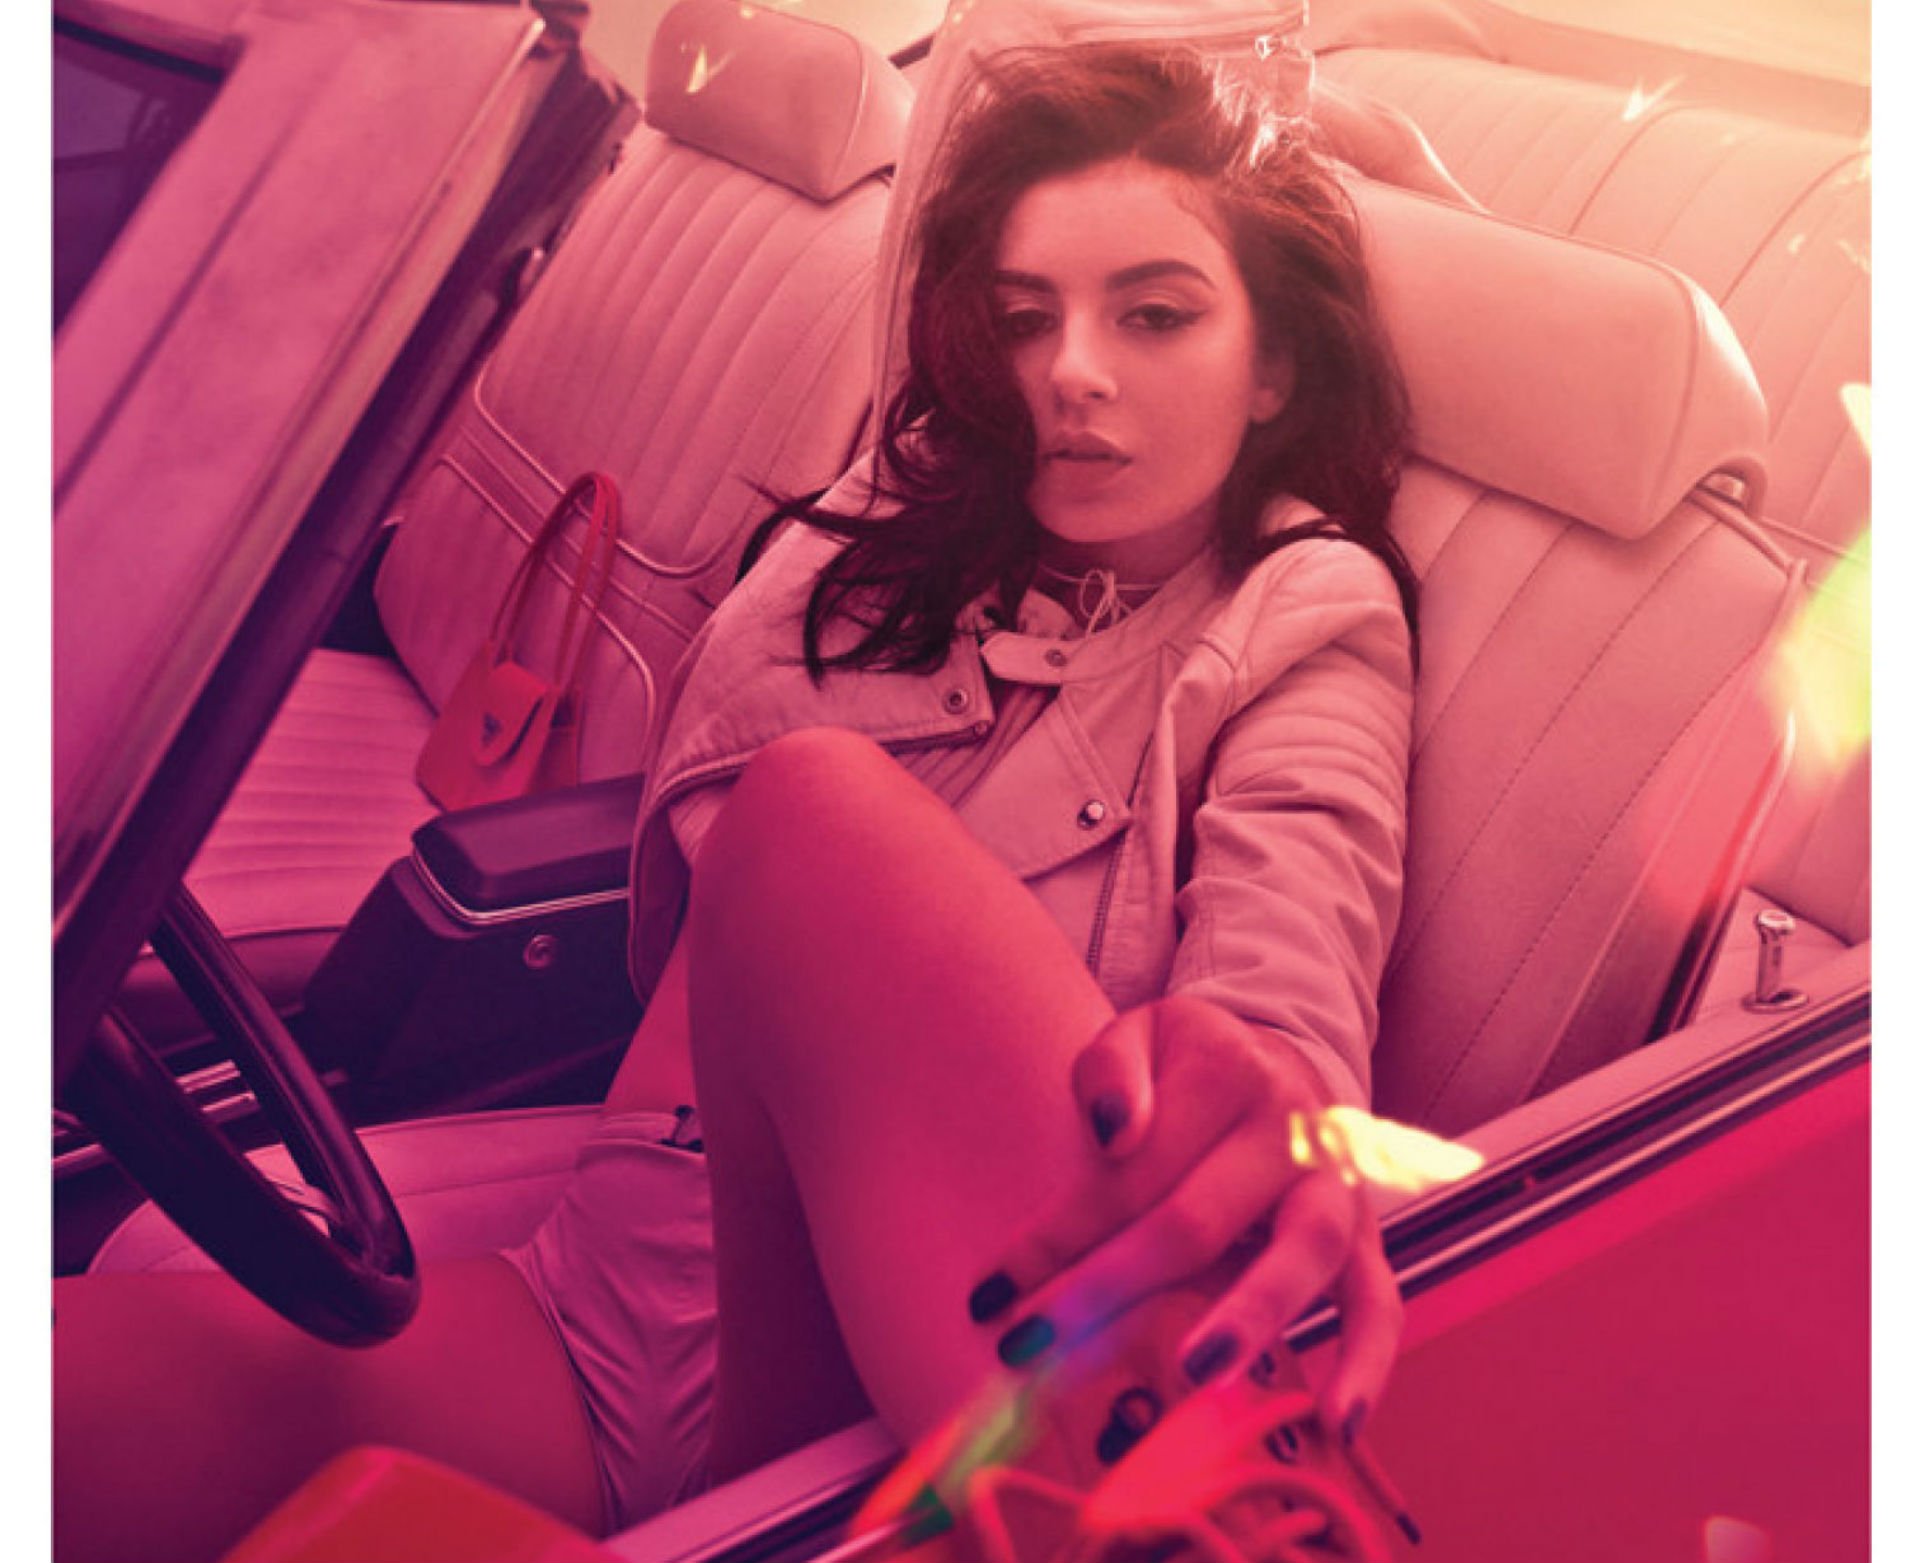 charli, Xcx, House, Pop, Electronica, Indie, Electro, Synth, Synthpop, Babe, Singer Wallpaper